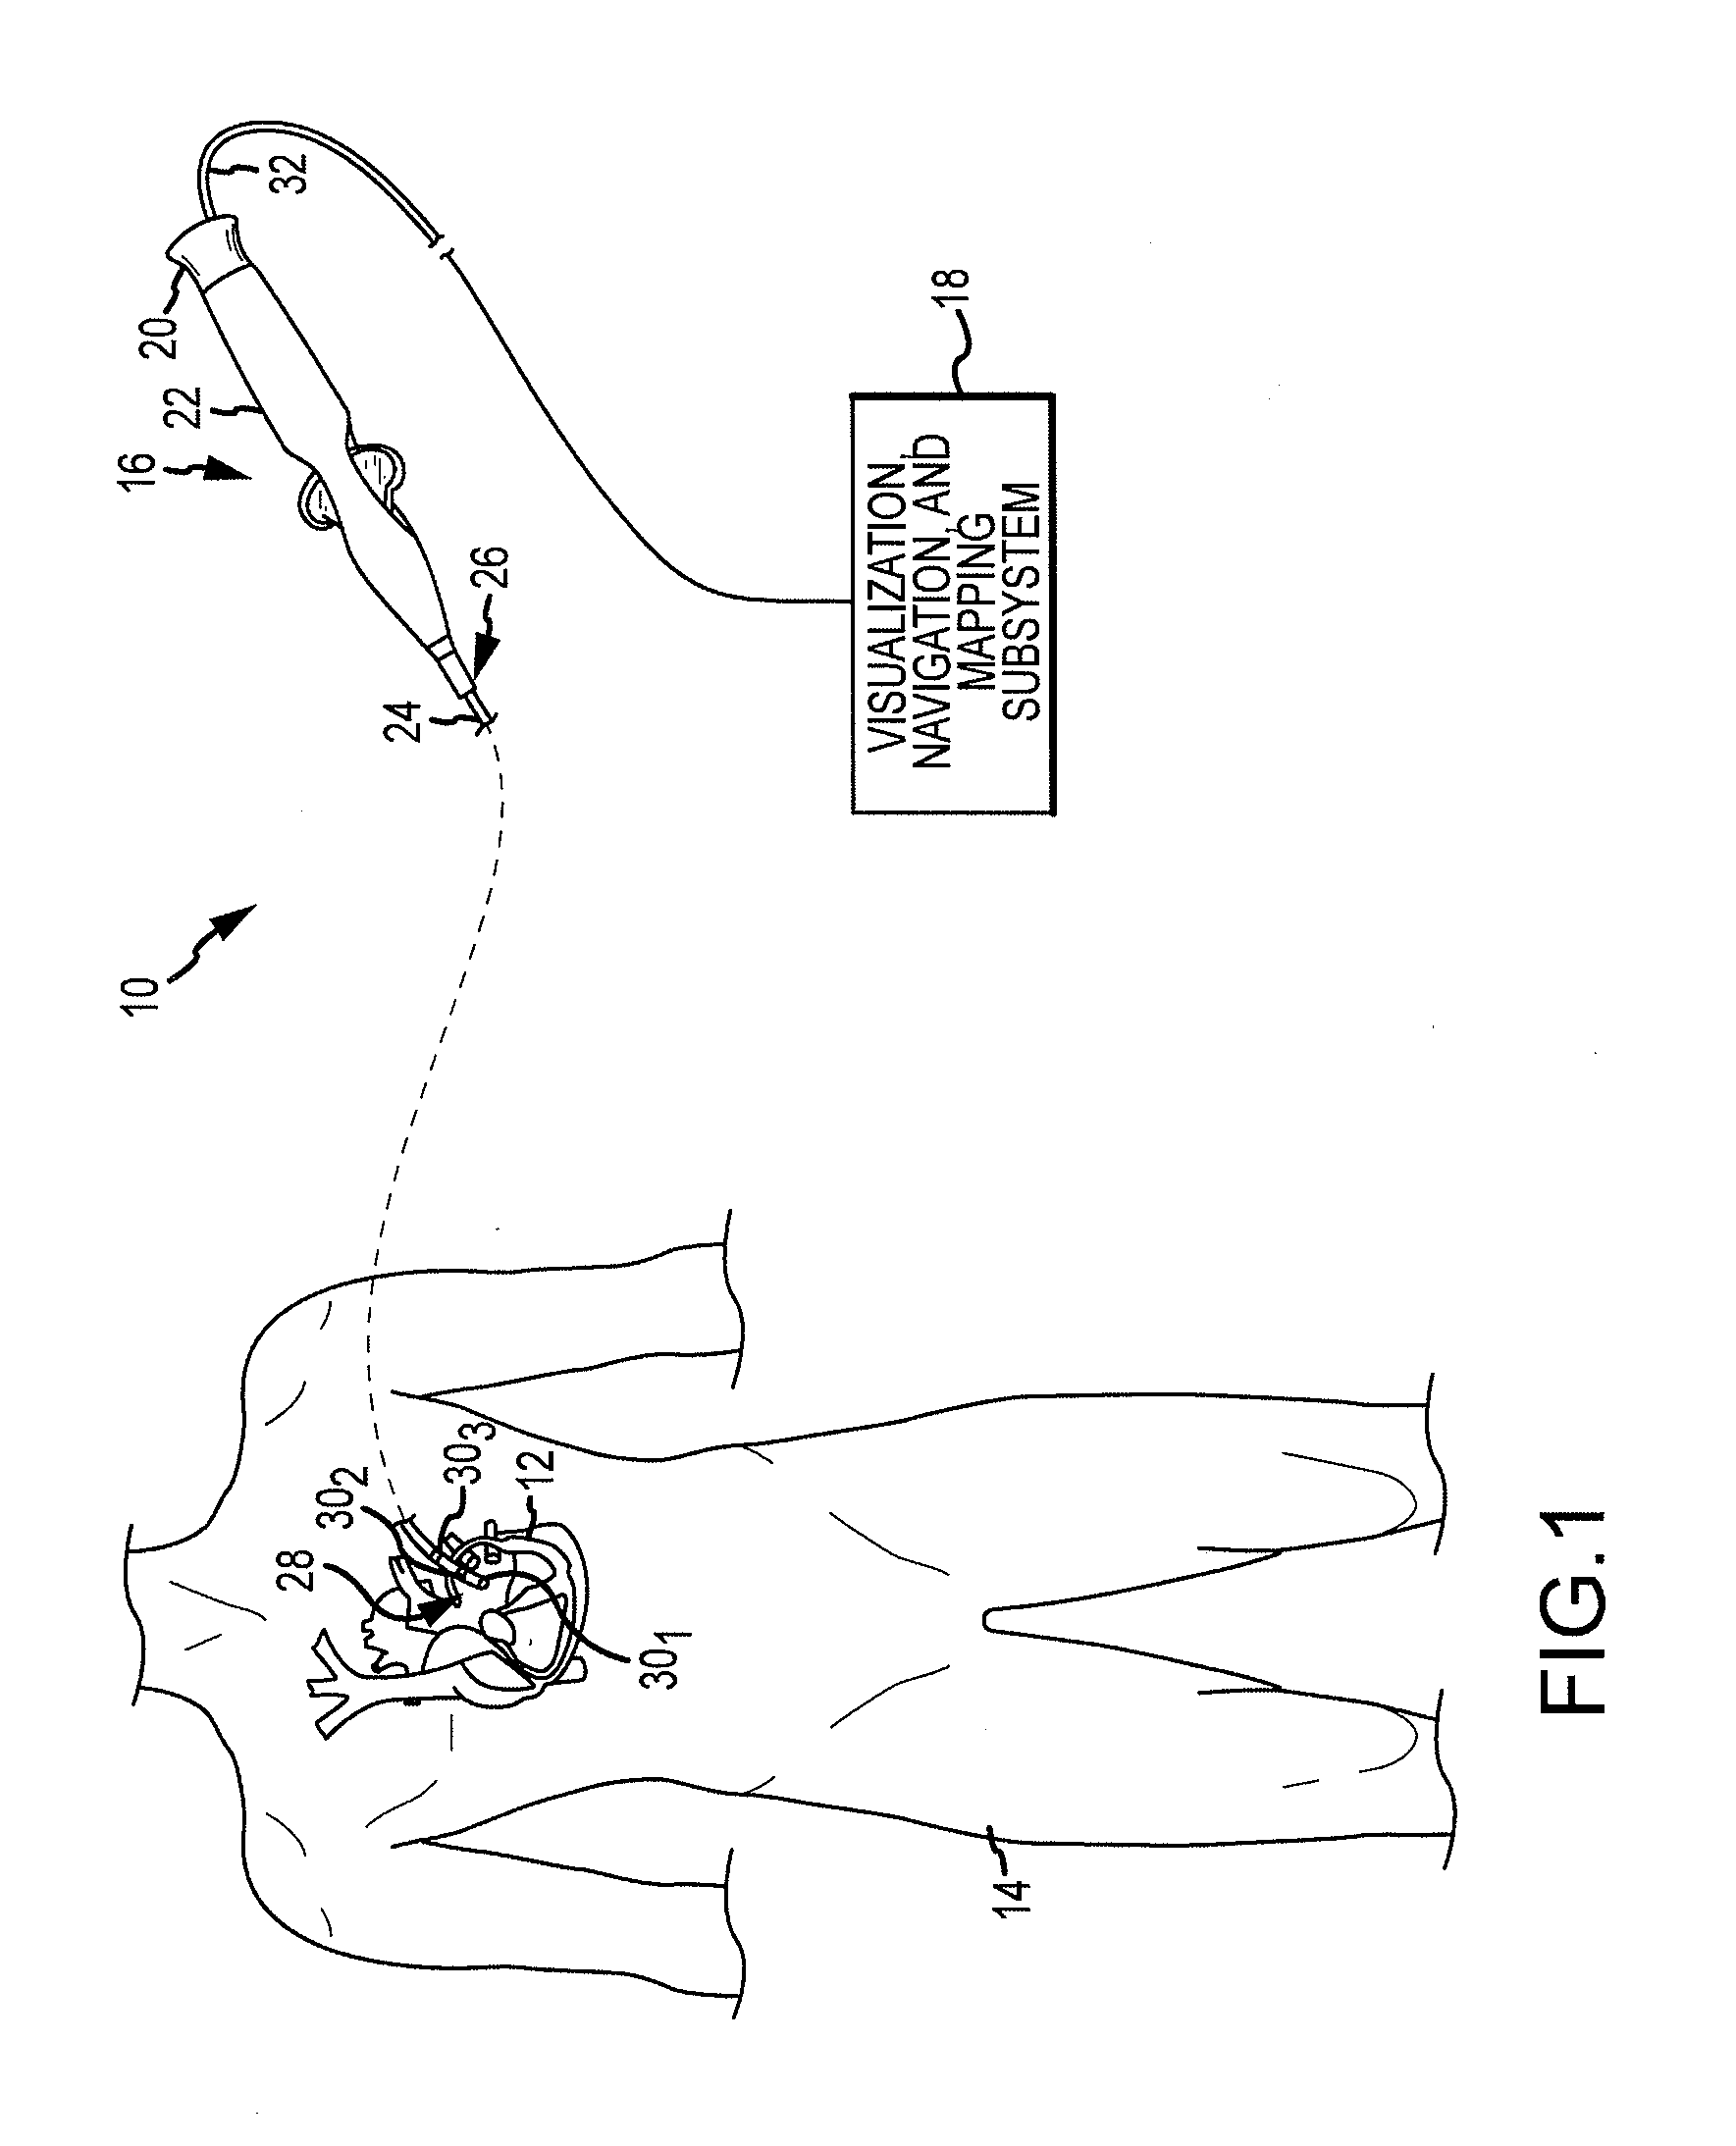 System and Method for Diagnosing Arrhythmias and Directing Catheter Therapies